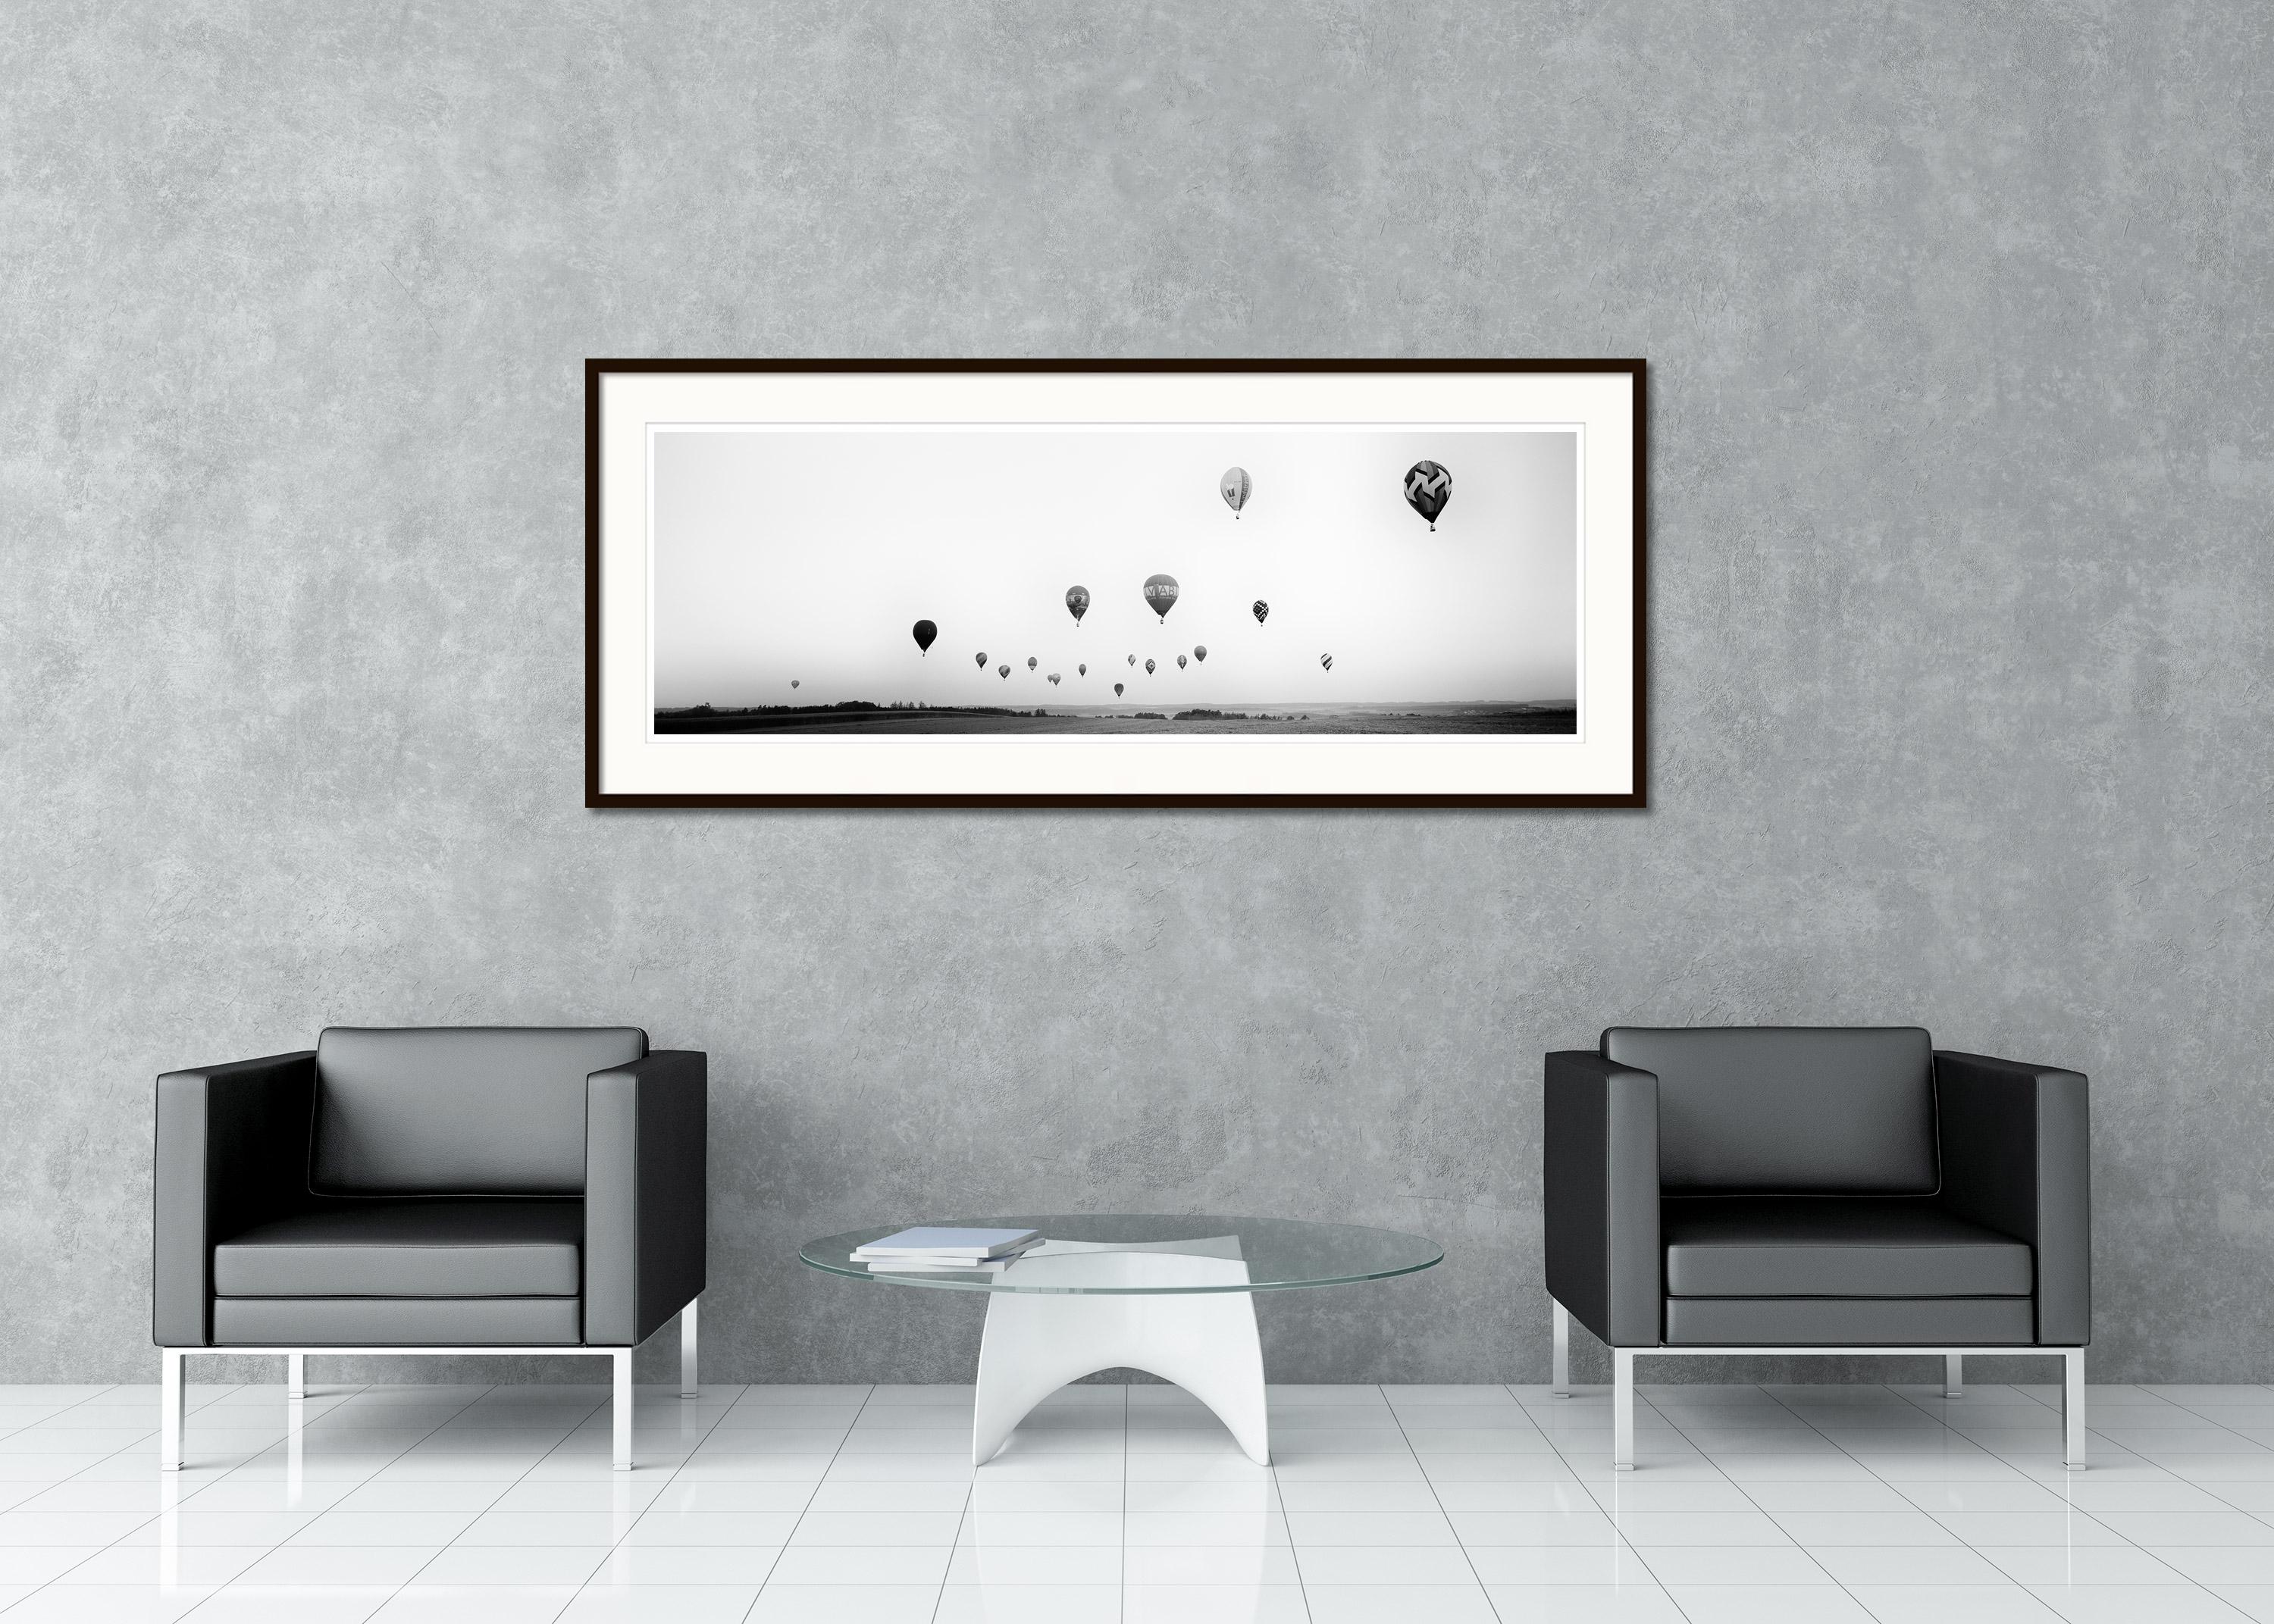 Black and White Fine Art Panorama Photography - Hot Air Balloon Panorama, World Championship, Austria. Archival pigment ink print, edition of 9. Signed, titled, dated and numbered by artist. Certificate of authenticity included. Printed with 4cm